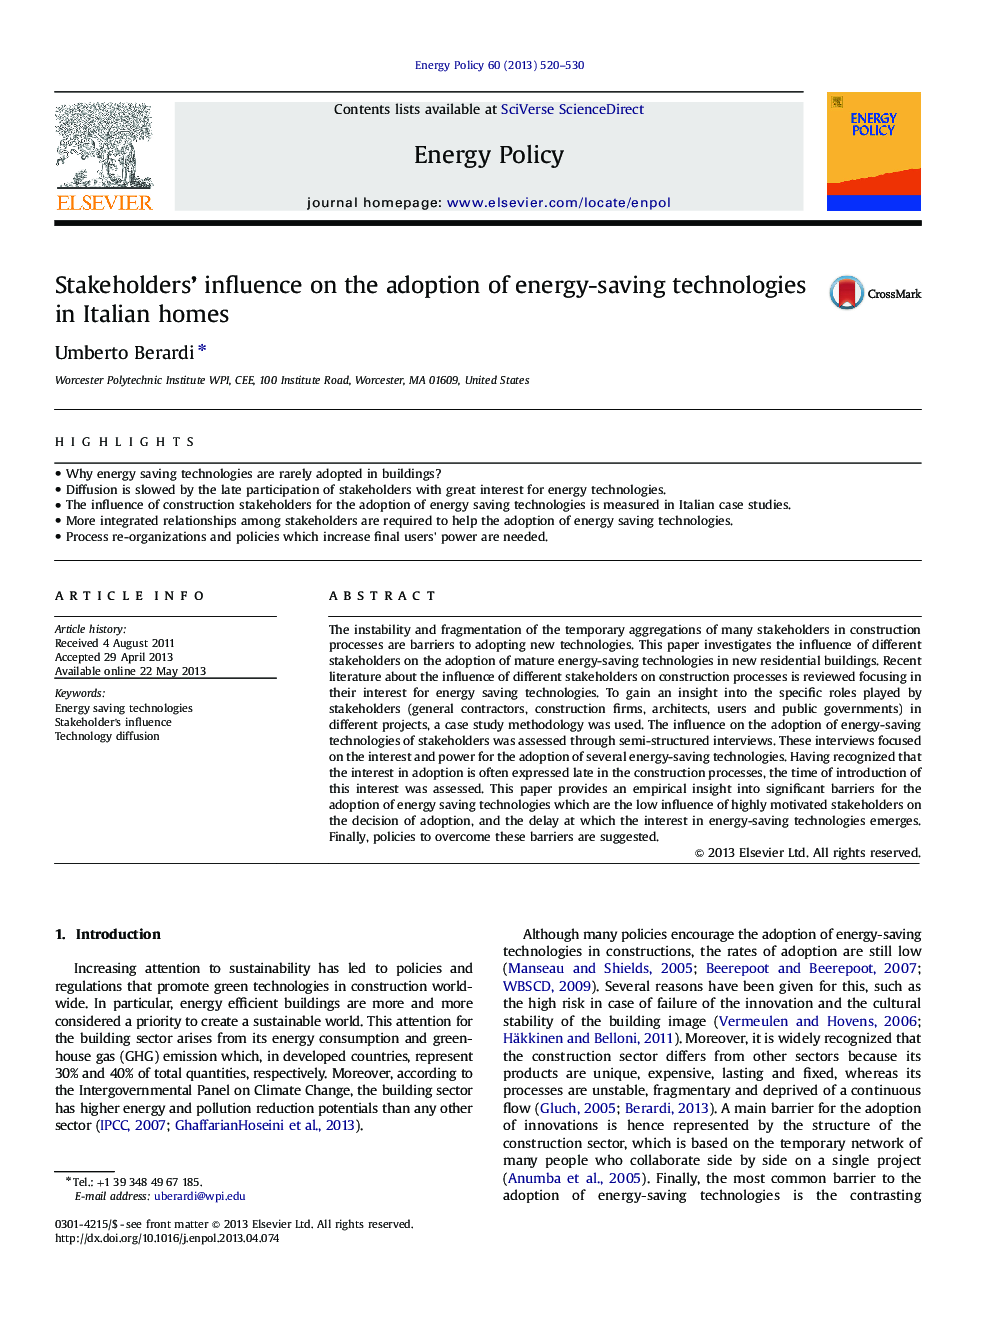 Stakeholders' influence on the adoption of energy-saving technologies in Italian homes